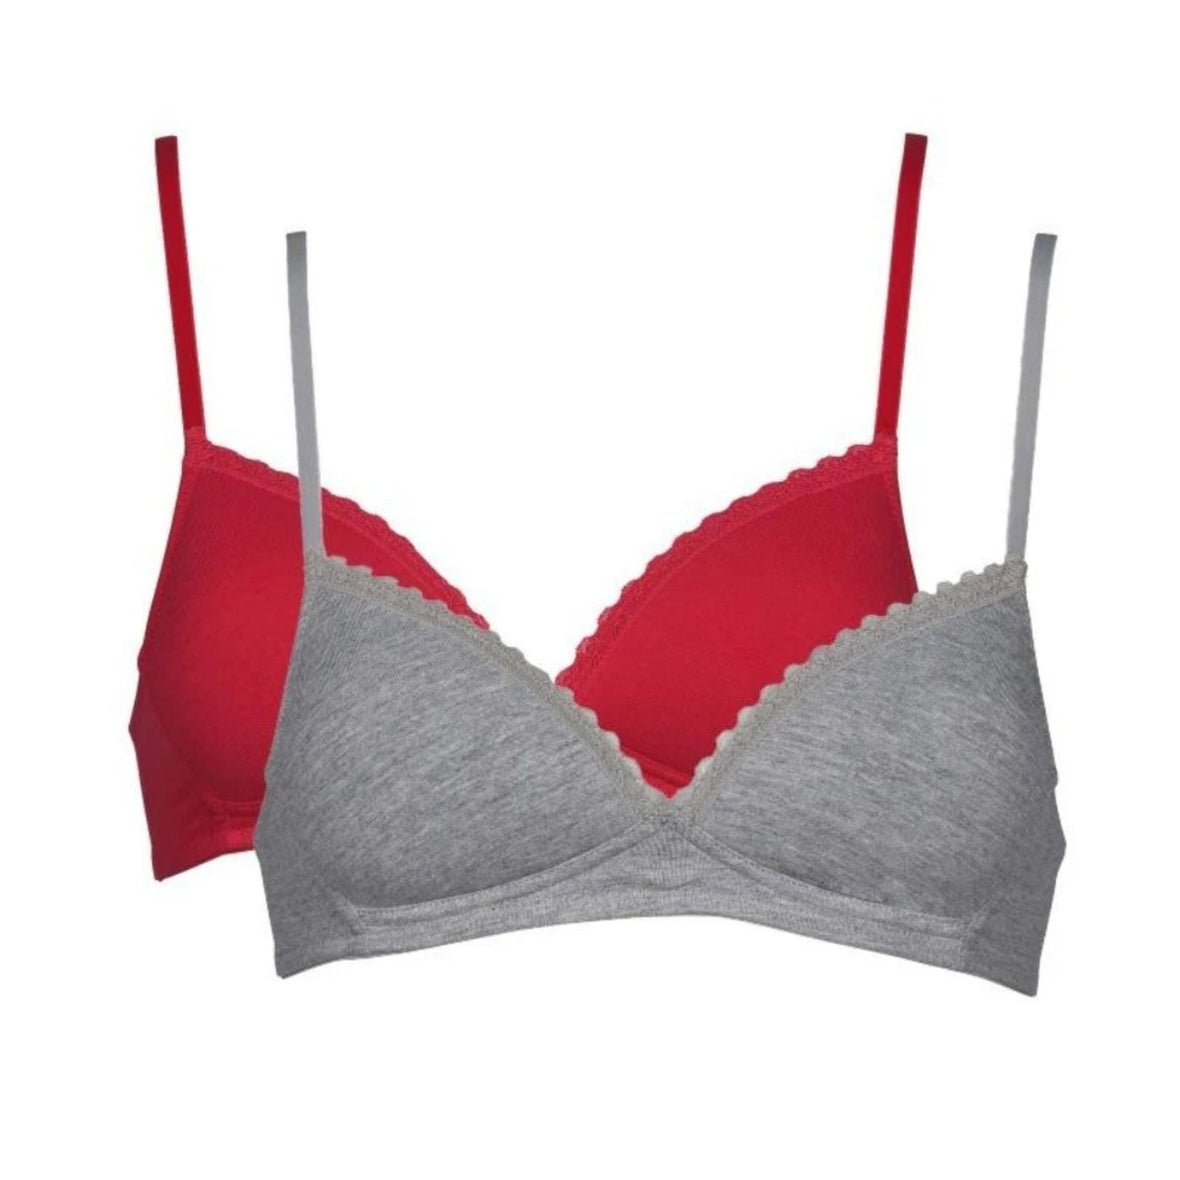 My Basic Teen Bras - 2 Pack Red and Grey